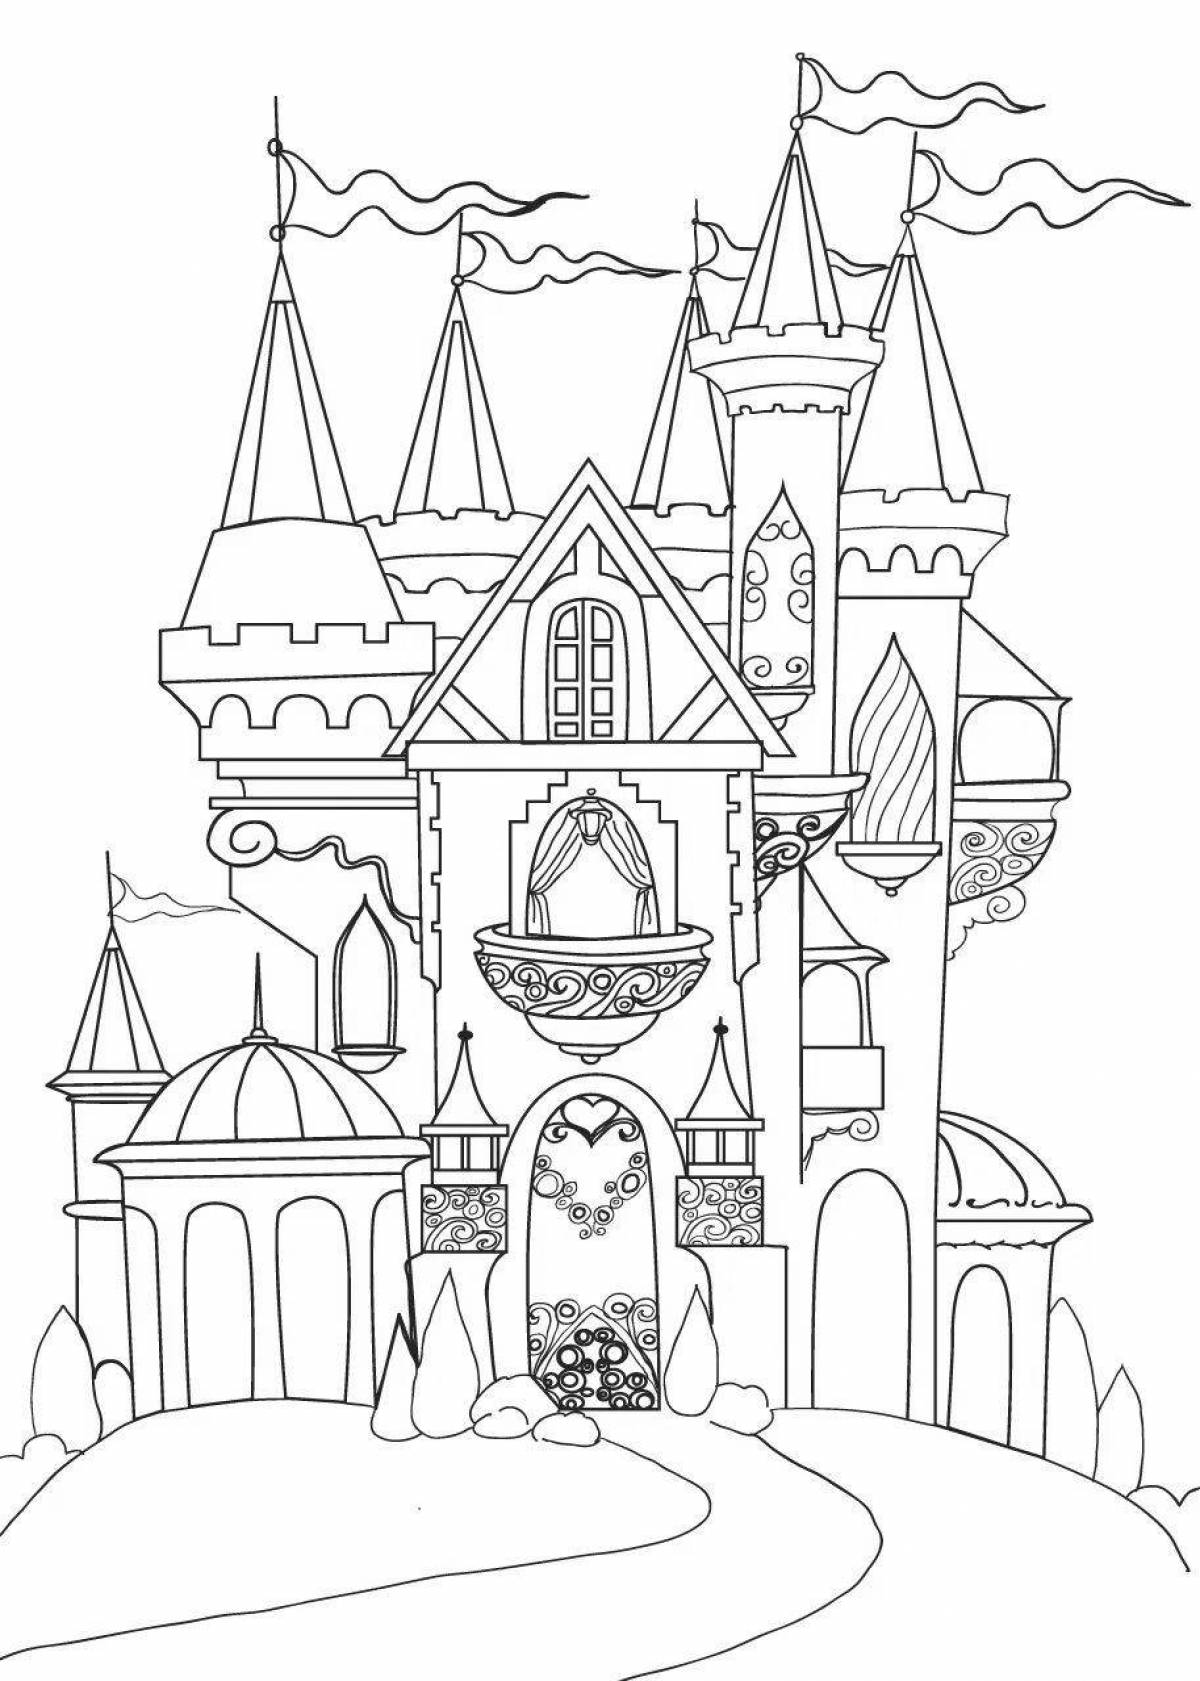 Coloring fairytale palace of the snow queen